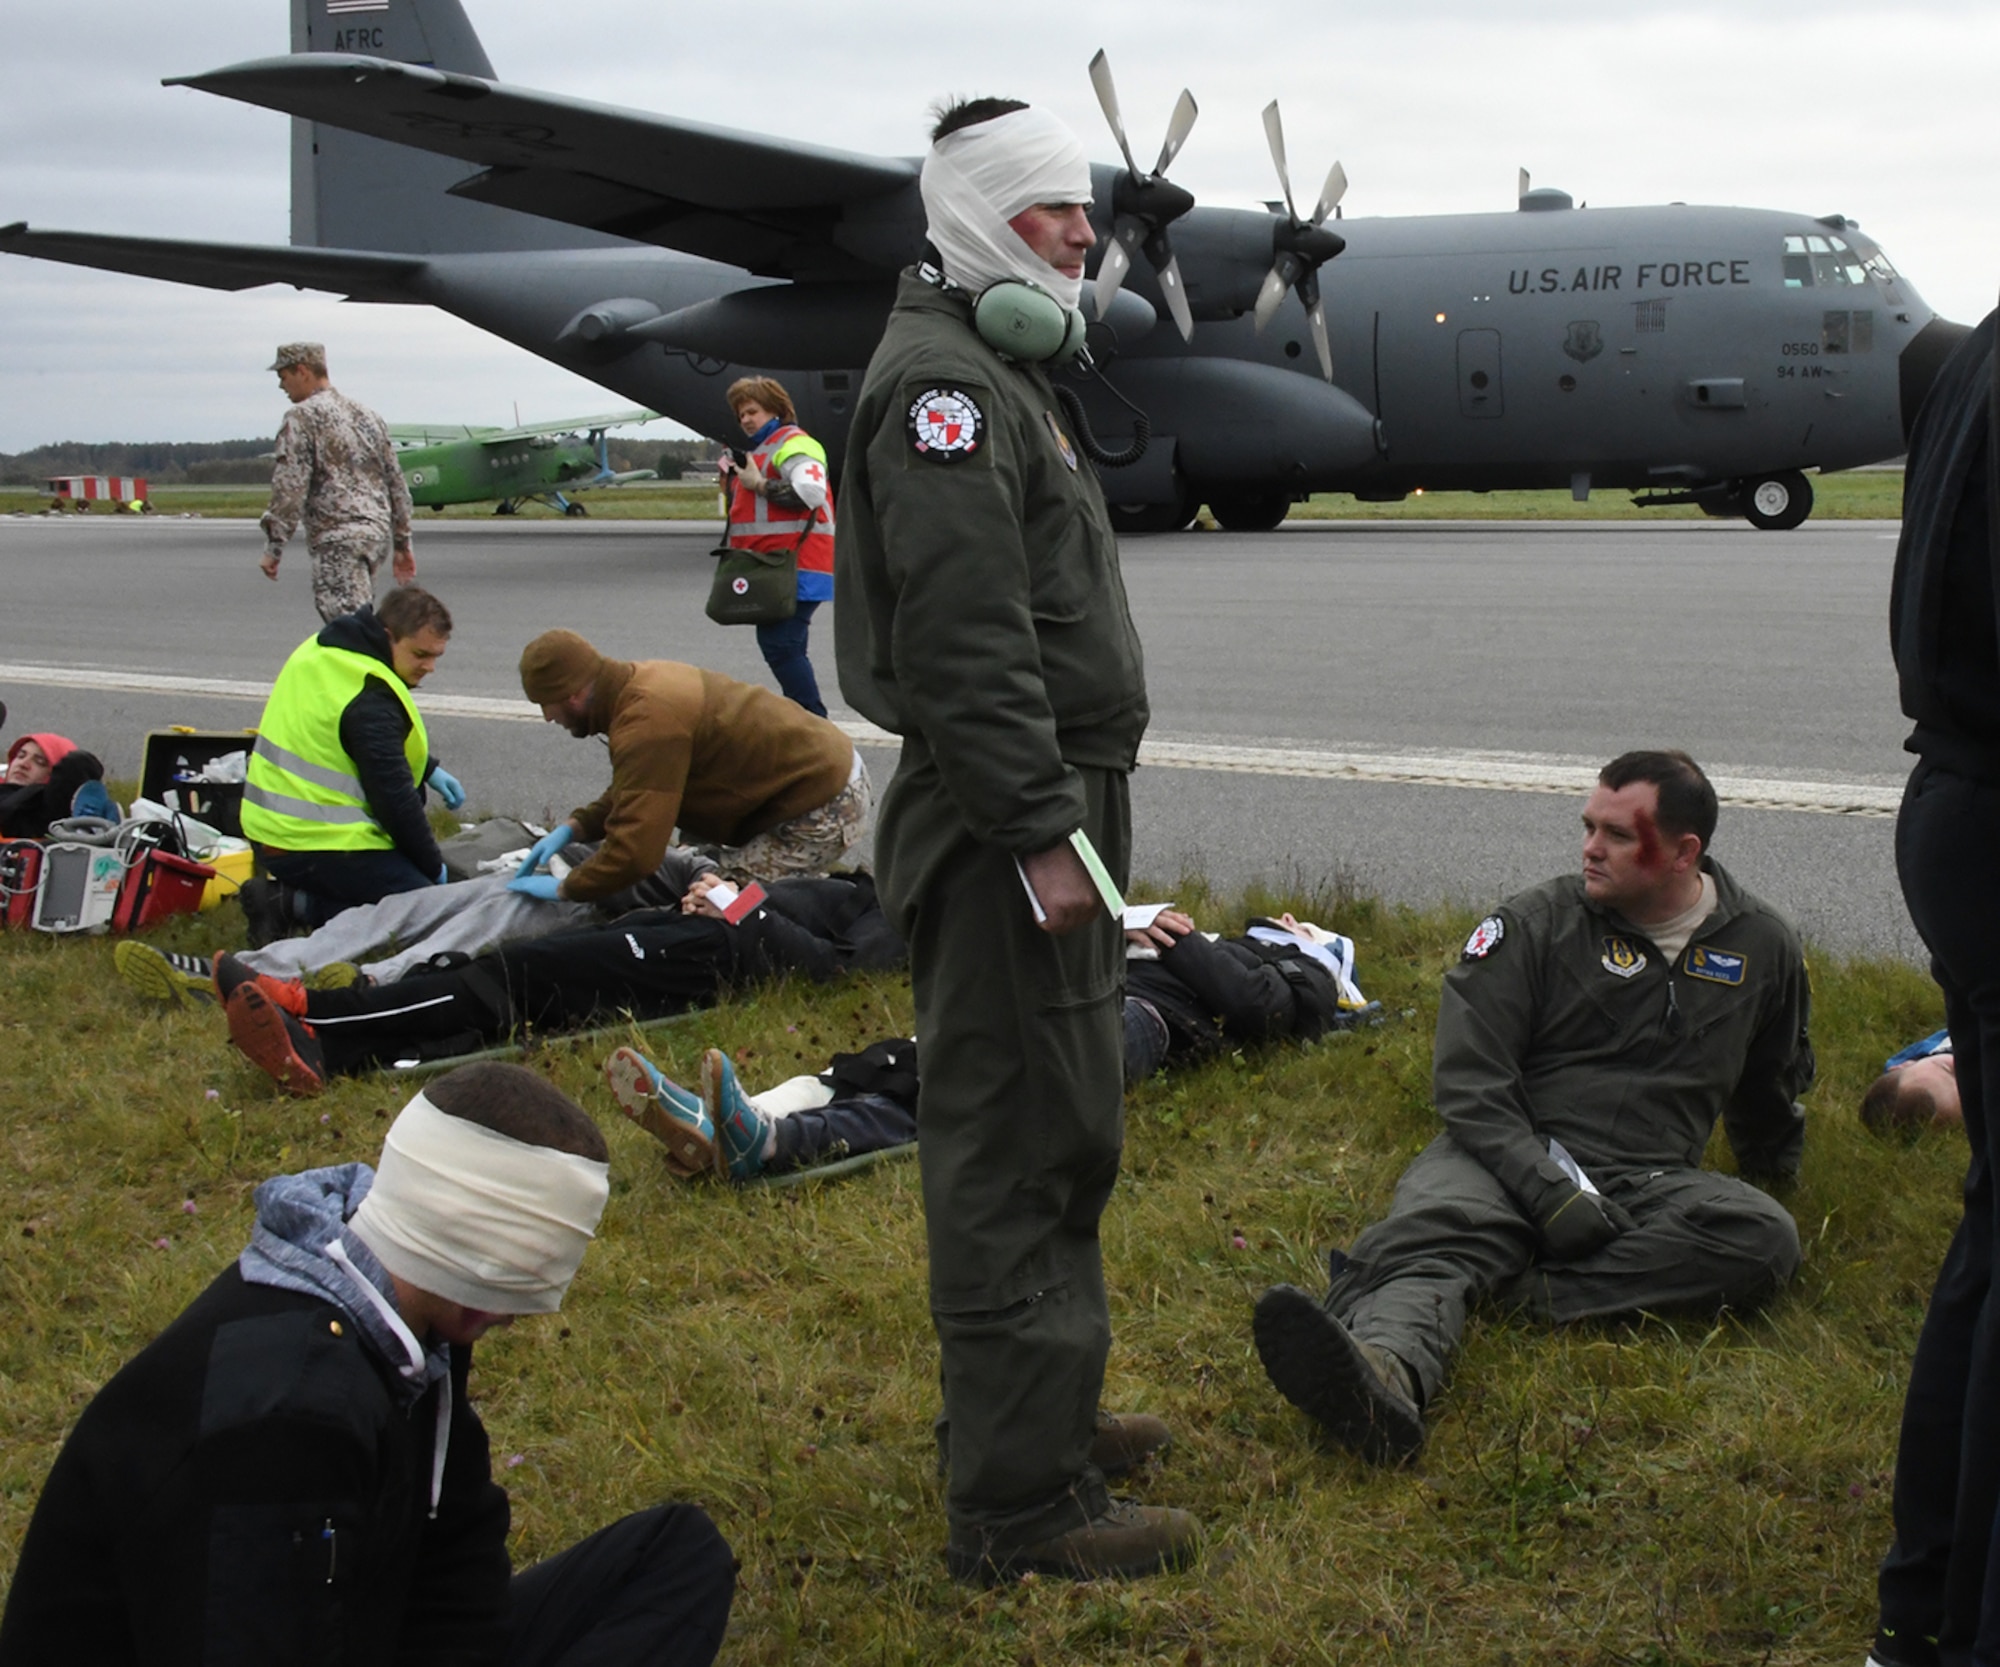 Senior Airman Joshua Stubbs, 700th Airlift Squadron loadmaster, and 1st Lt. Brian Reed, 700th AS pilot, join others with simulated injuries during Sky Fist, an aircraft mishap training exercise, held at Lielvarde Air Base, Latvia, Oct. 6, 2016. Sky Fist was a bilateral exercise designed to strengthen interoperability and the partnership between the U.S. and Latvia. (U.S. Air Force photo by Staff Sgt. Alan Abernethy)